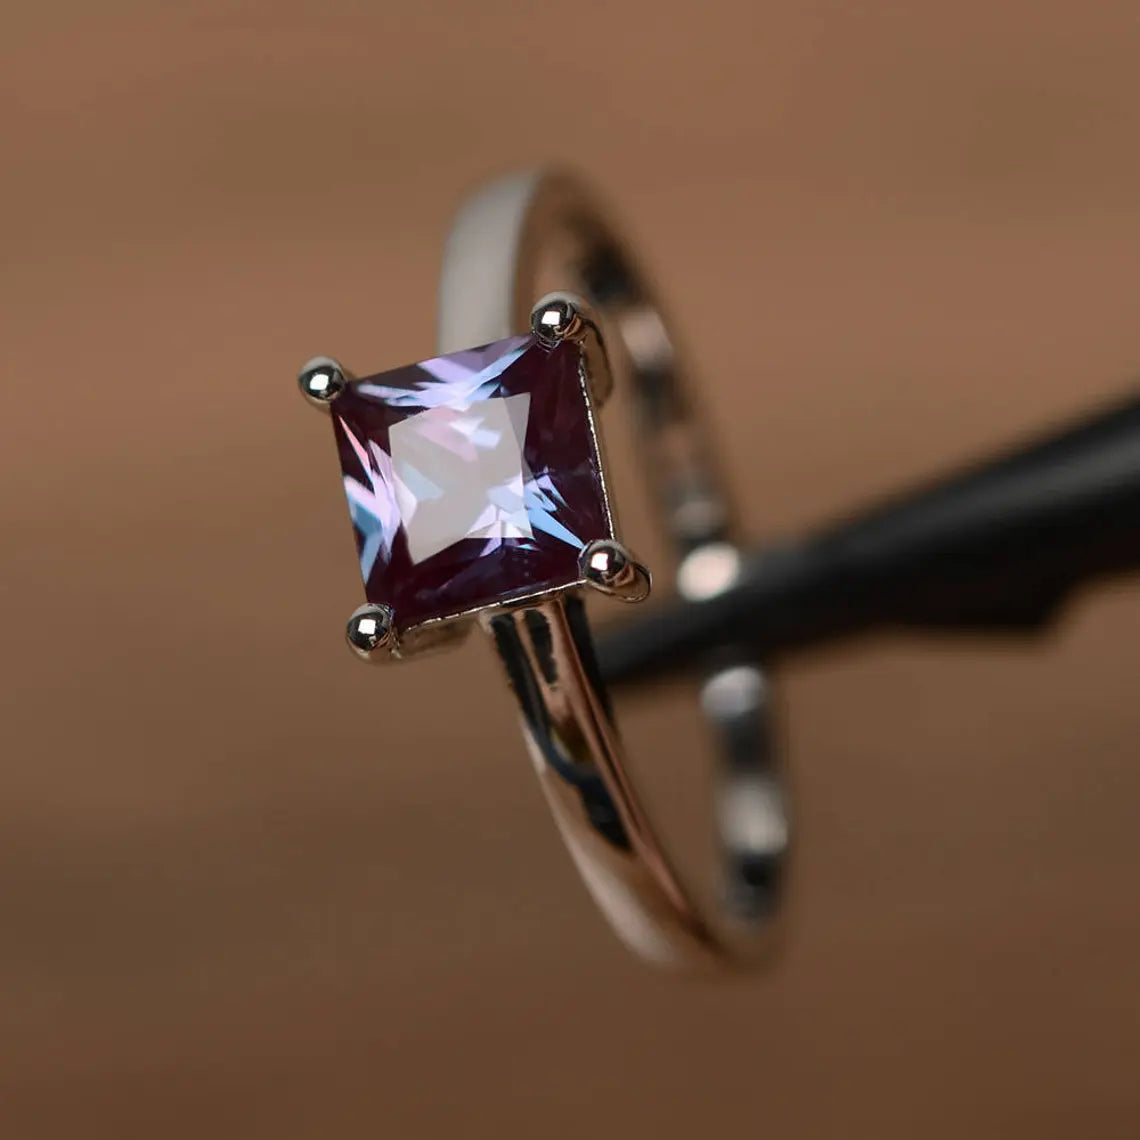 Alexandrite Square Cut Simple Promise Ring - 925 Sterling Silver Rings